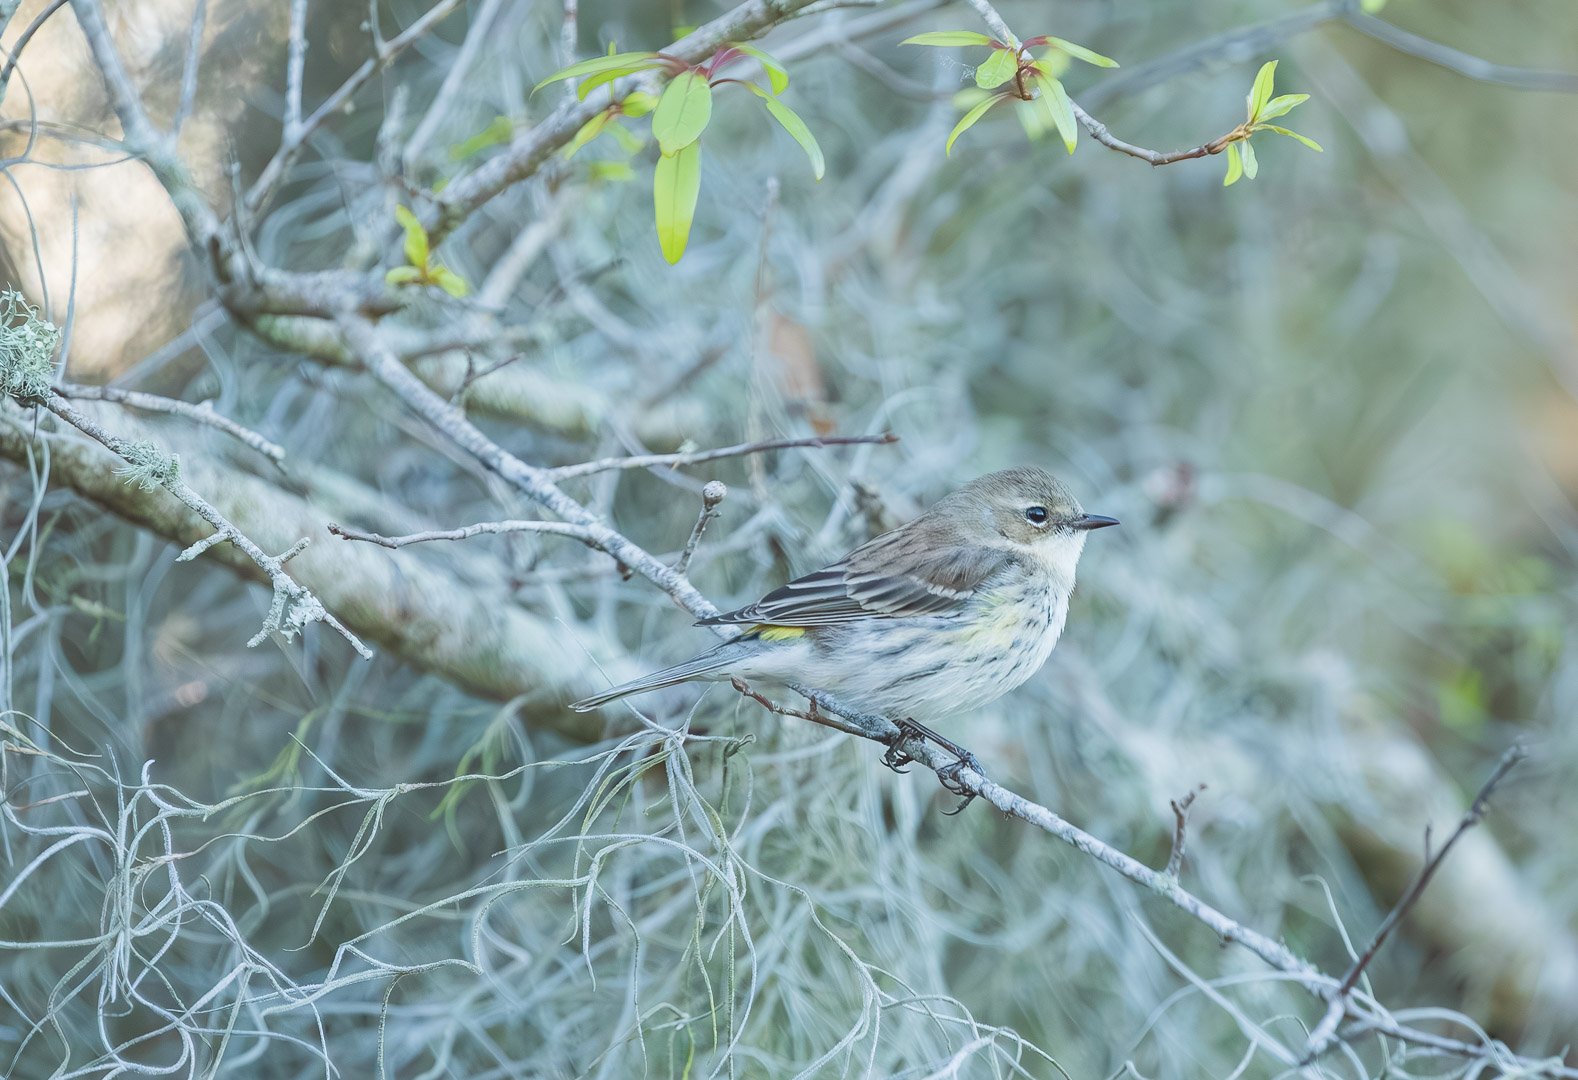  What sets the Yellow-rumped Warbler apart is its remarkable survival strategy in foraging. While they primarily feast on insects, their ability to switch to berries, particularly bayberries and wax myrtle berries in the fall, grants them a distinct 